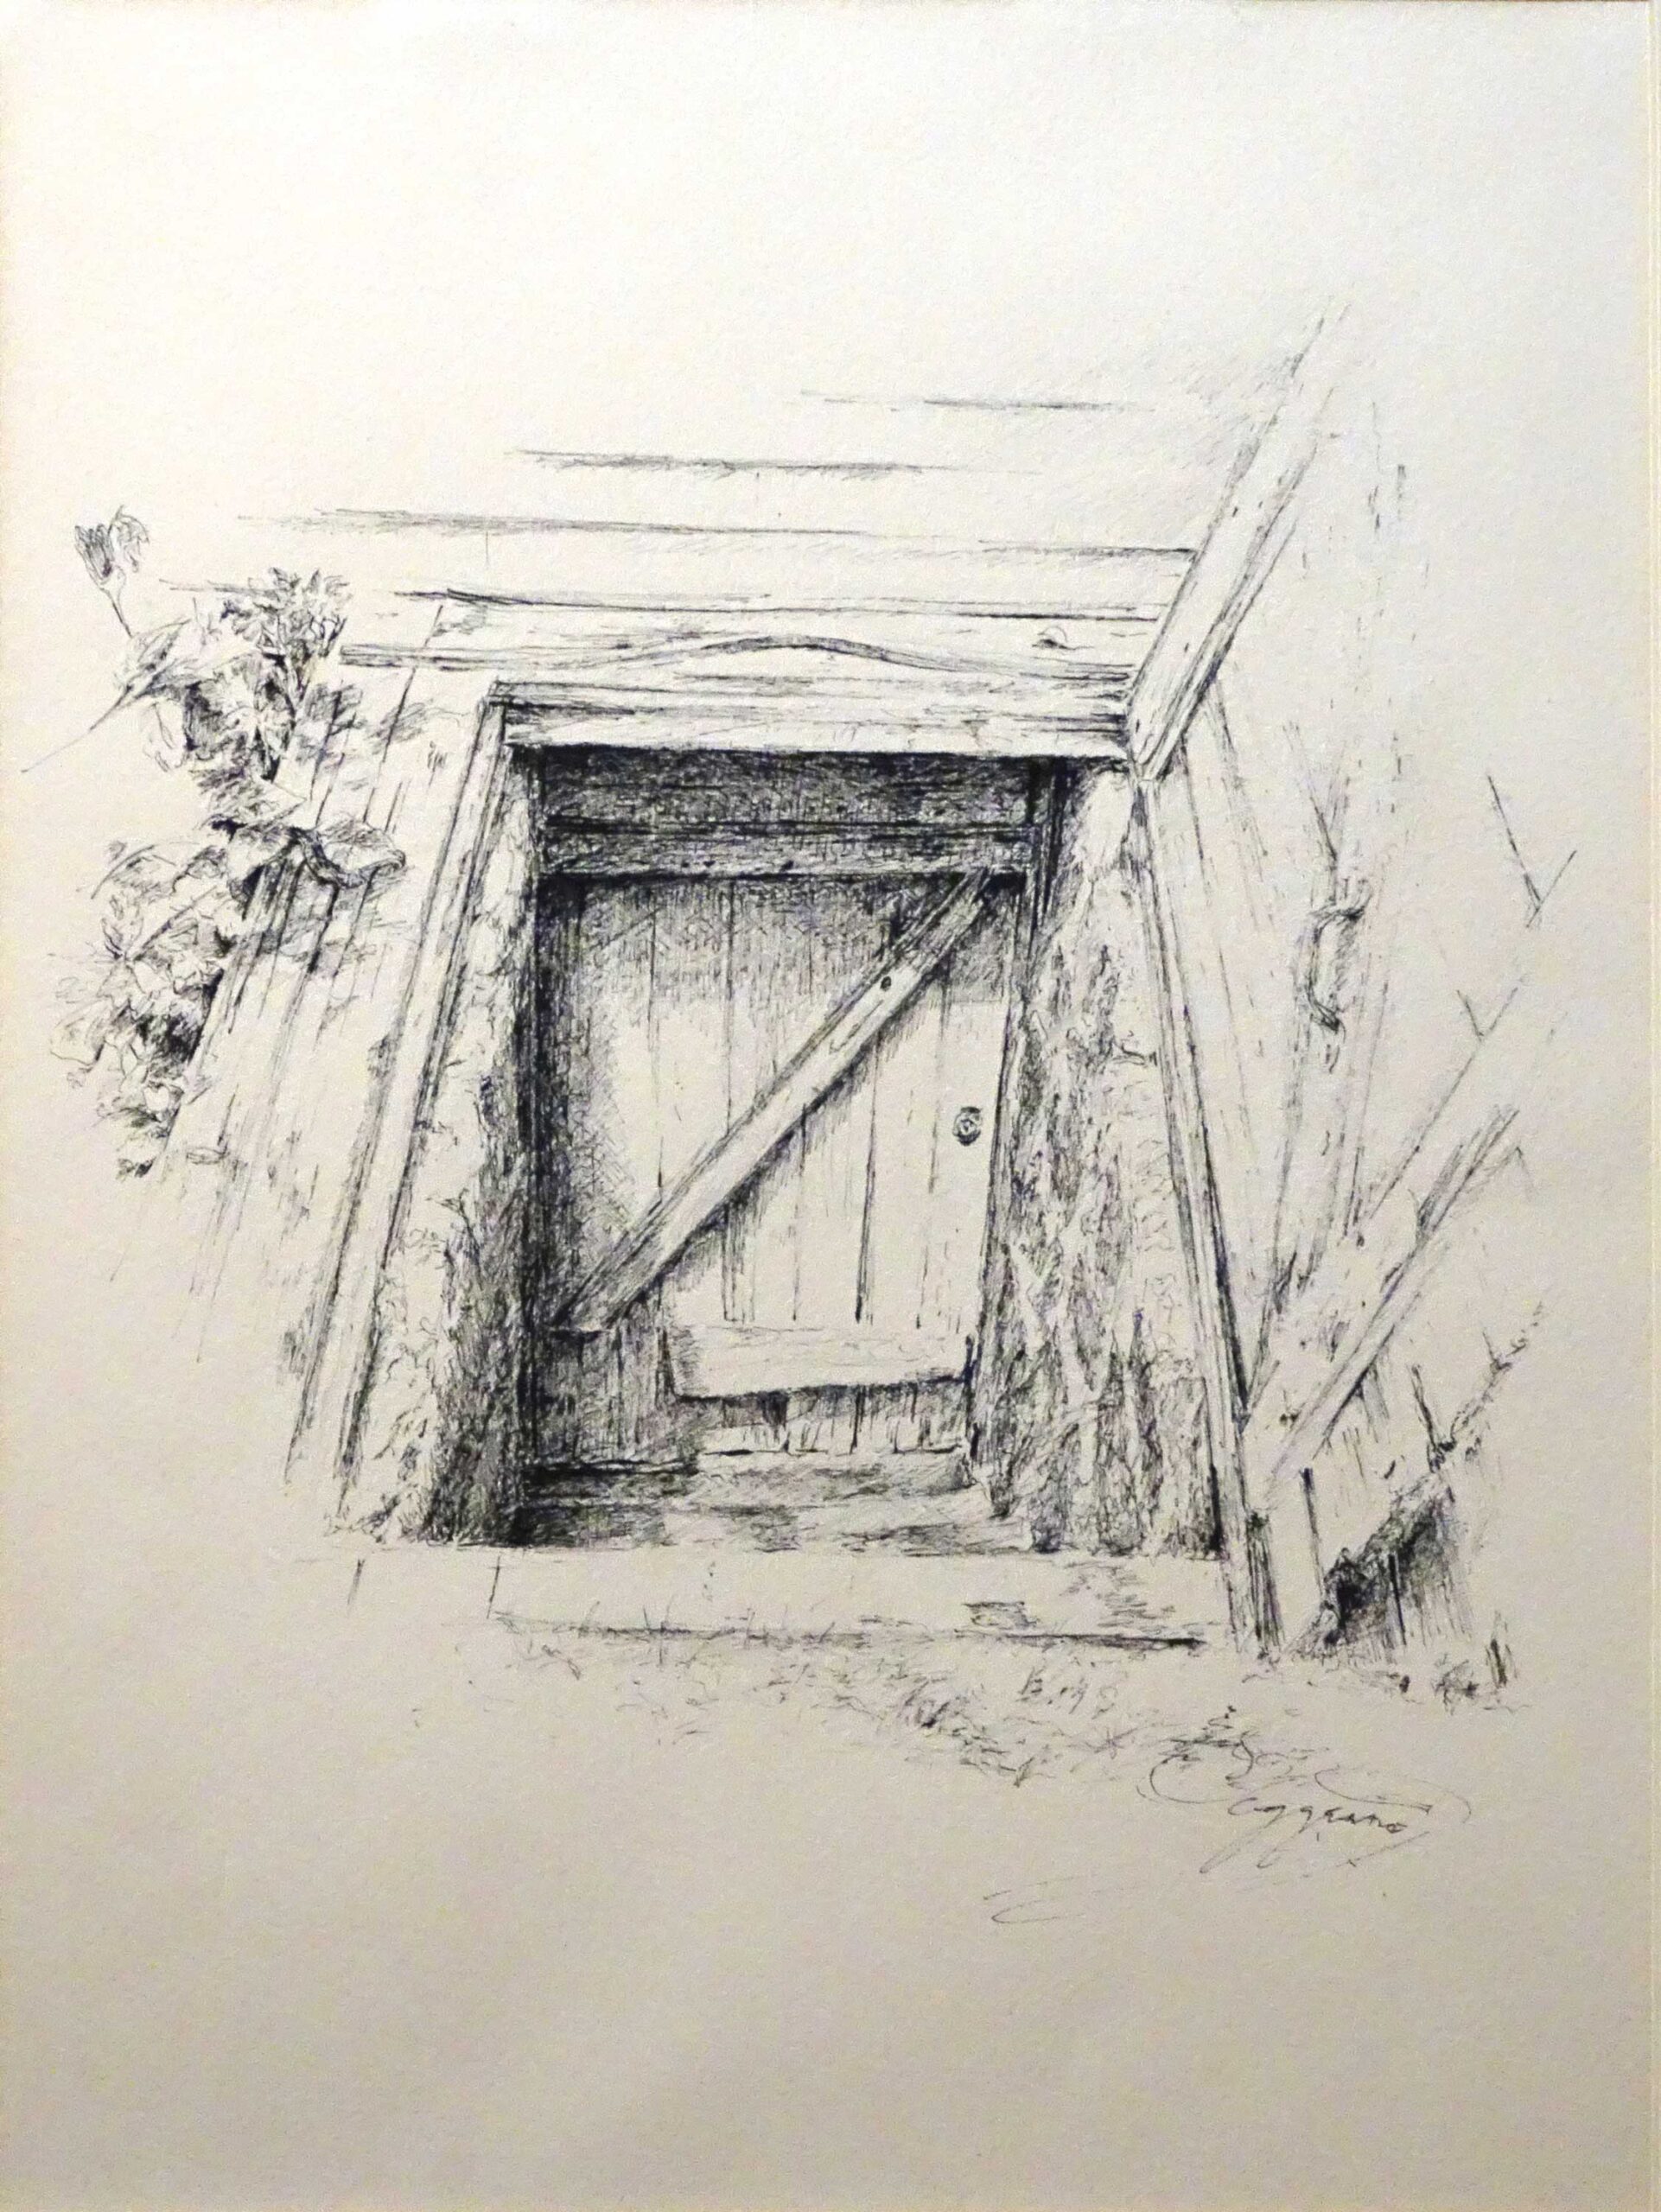 realistic drawings - John Caggiano (b. 1949), "Storm Cellar," 1980, ink on paper, 15 x 11 in., available through the artist 